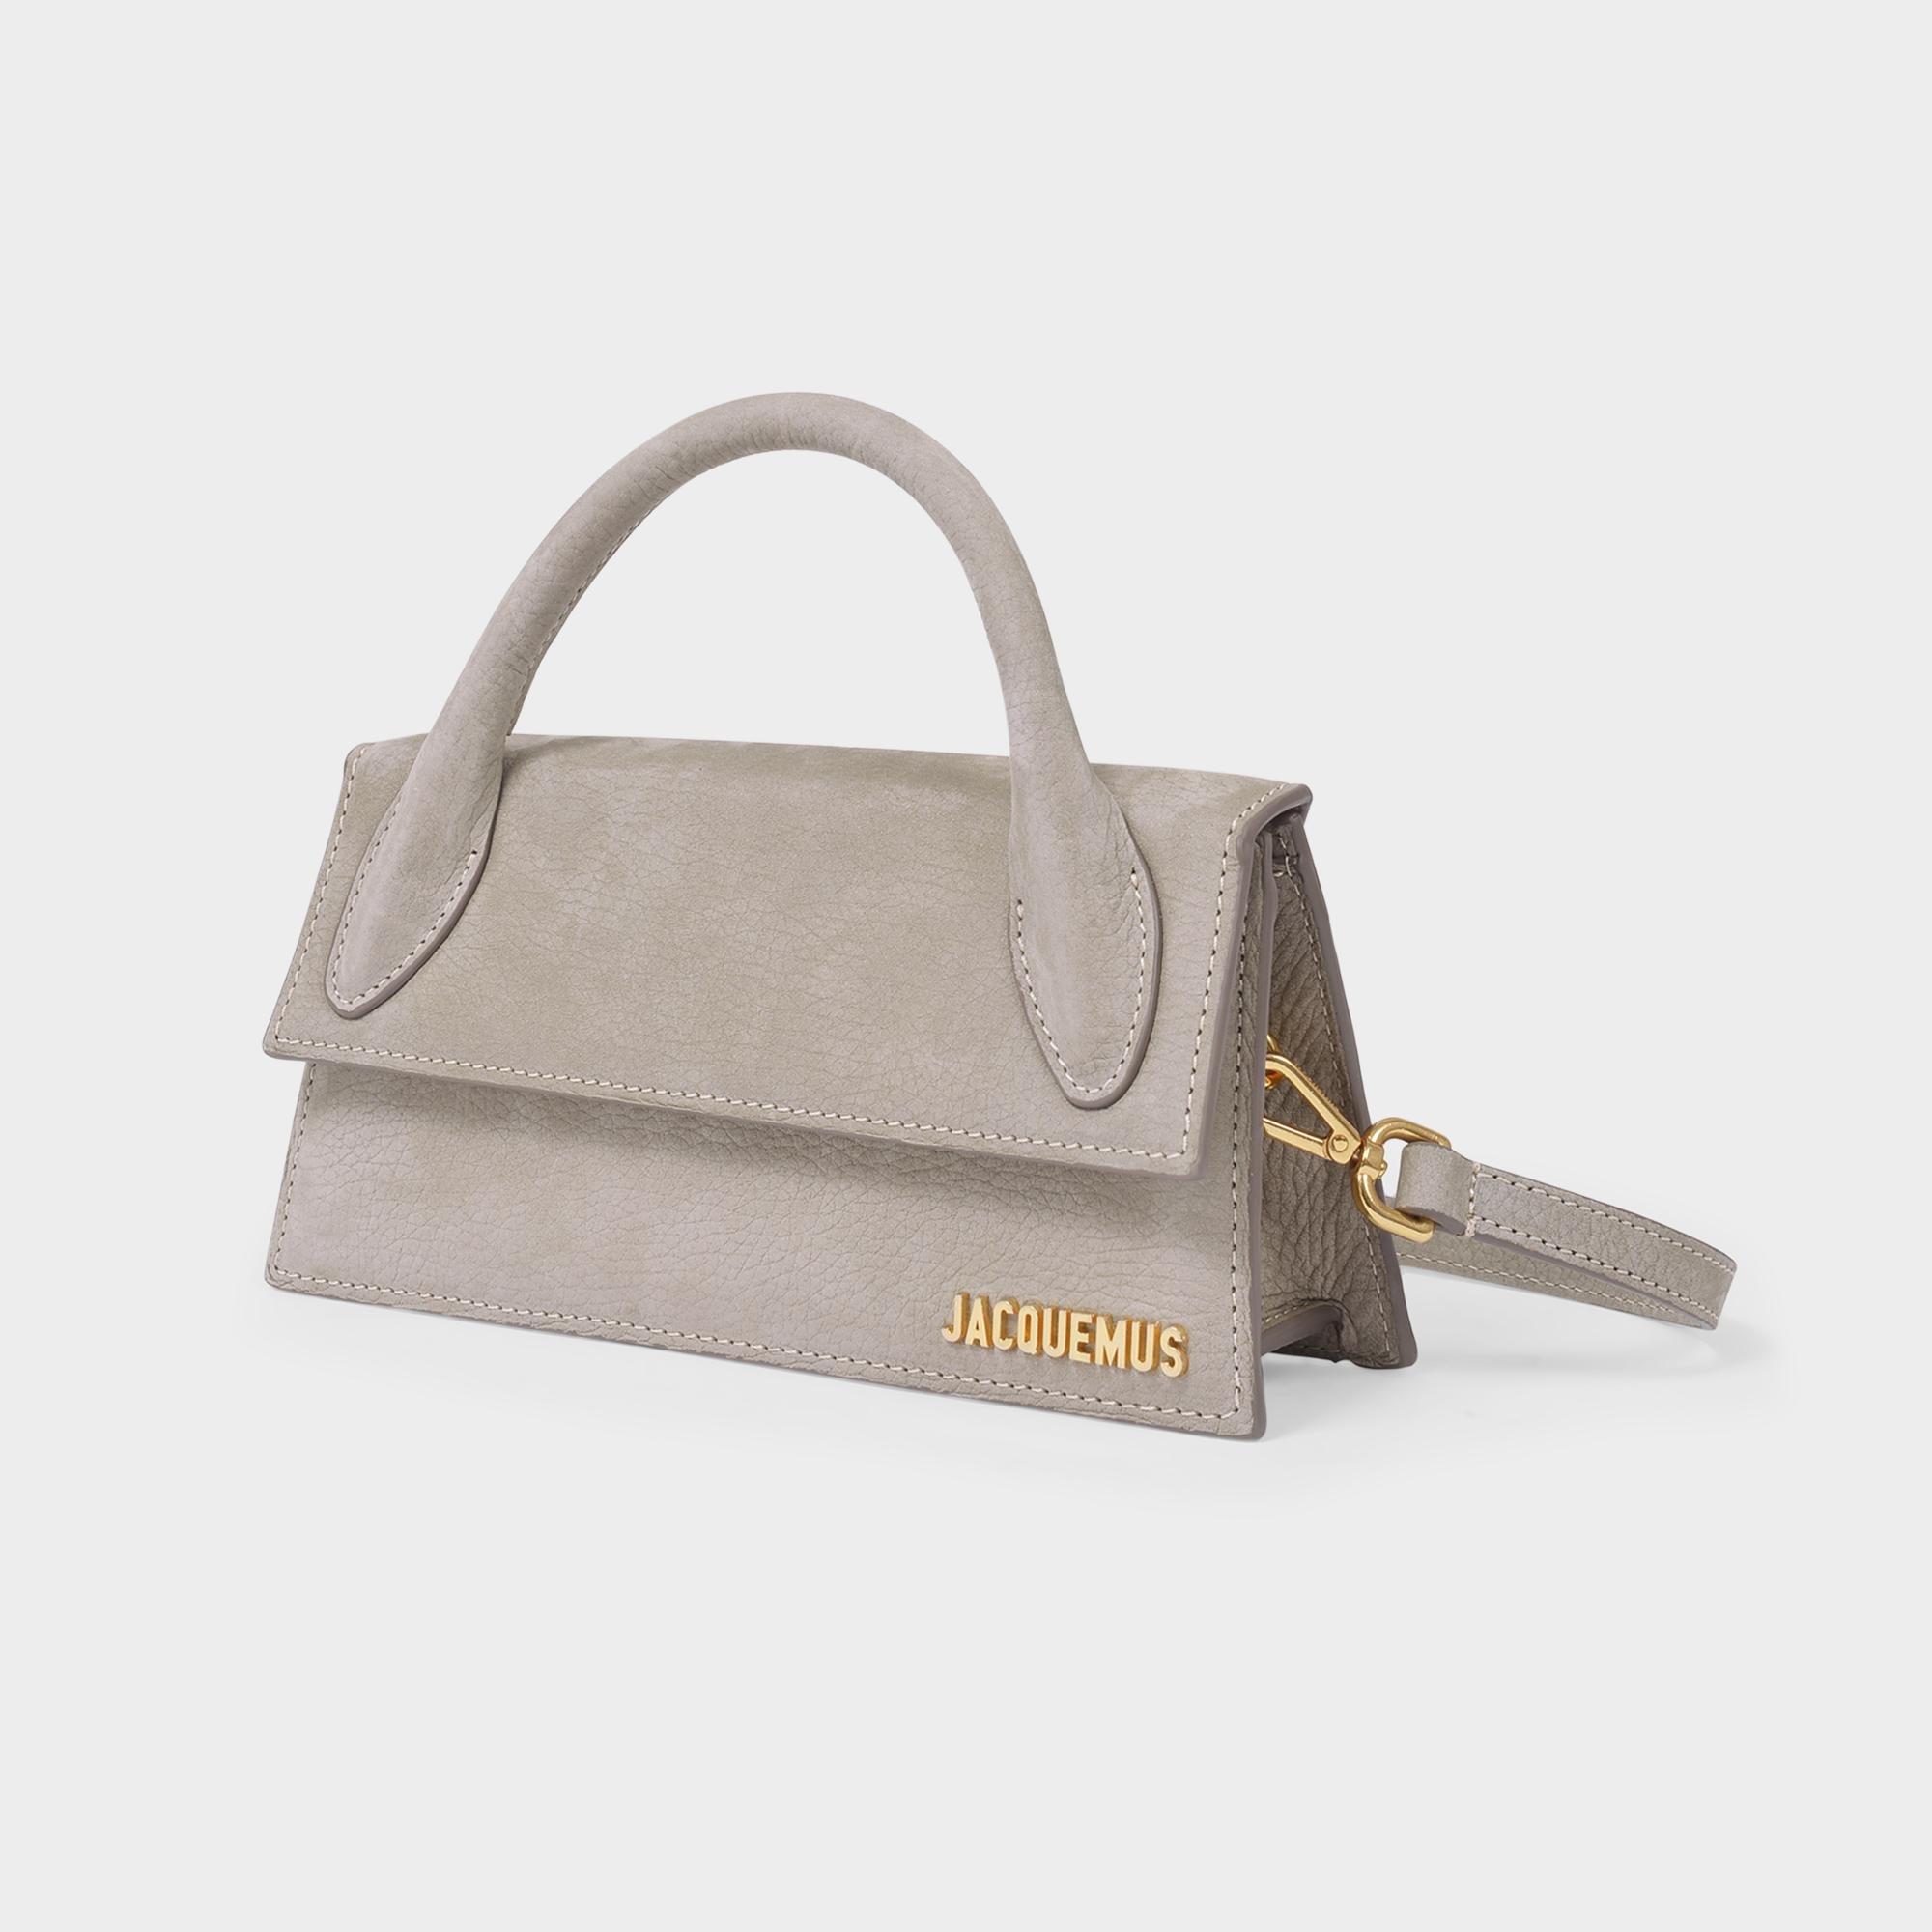 Jacquemus Le Chiquito Long Bag In Beige Leather in Natural - Lyst